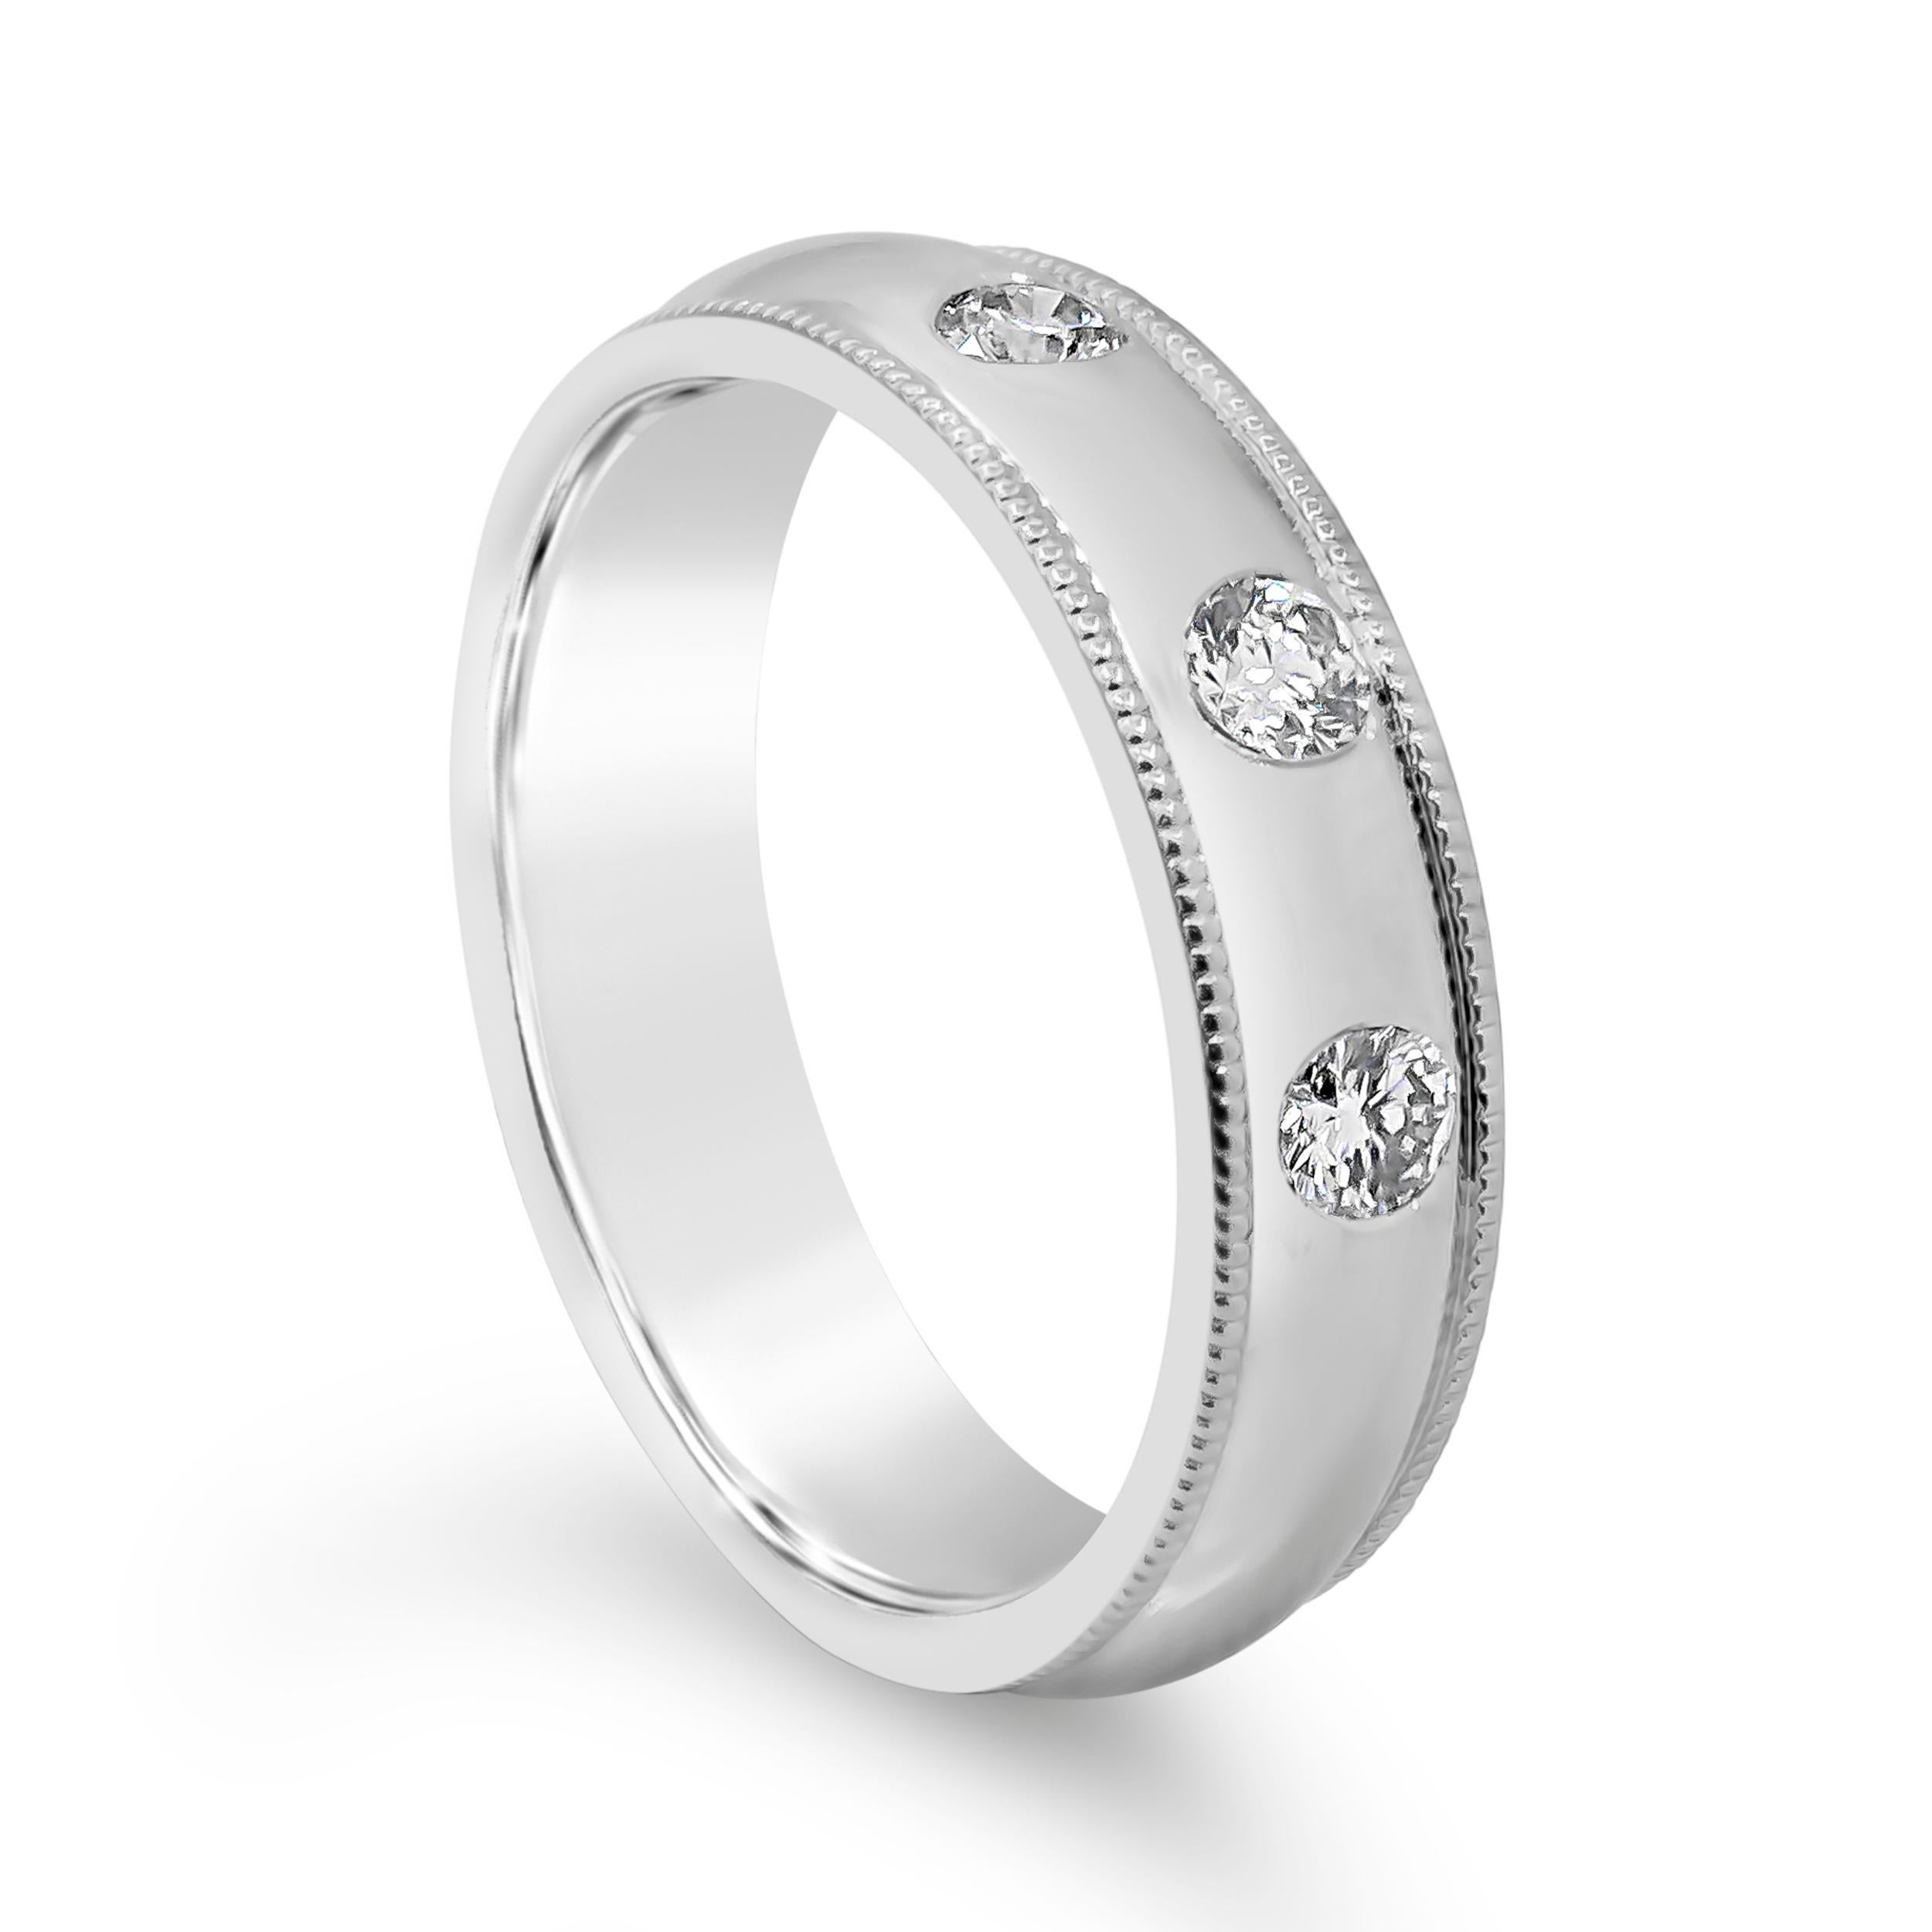 A chic wedding band showcasing three round diamonds weighing 0.35 carats total, flush set in a polished platinum mounting. Finished with milgrain edges. Size 7.5 US.

Style available in different price ranges. Prices are based on your selection of